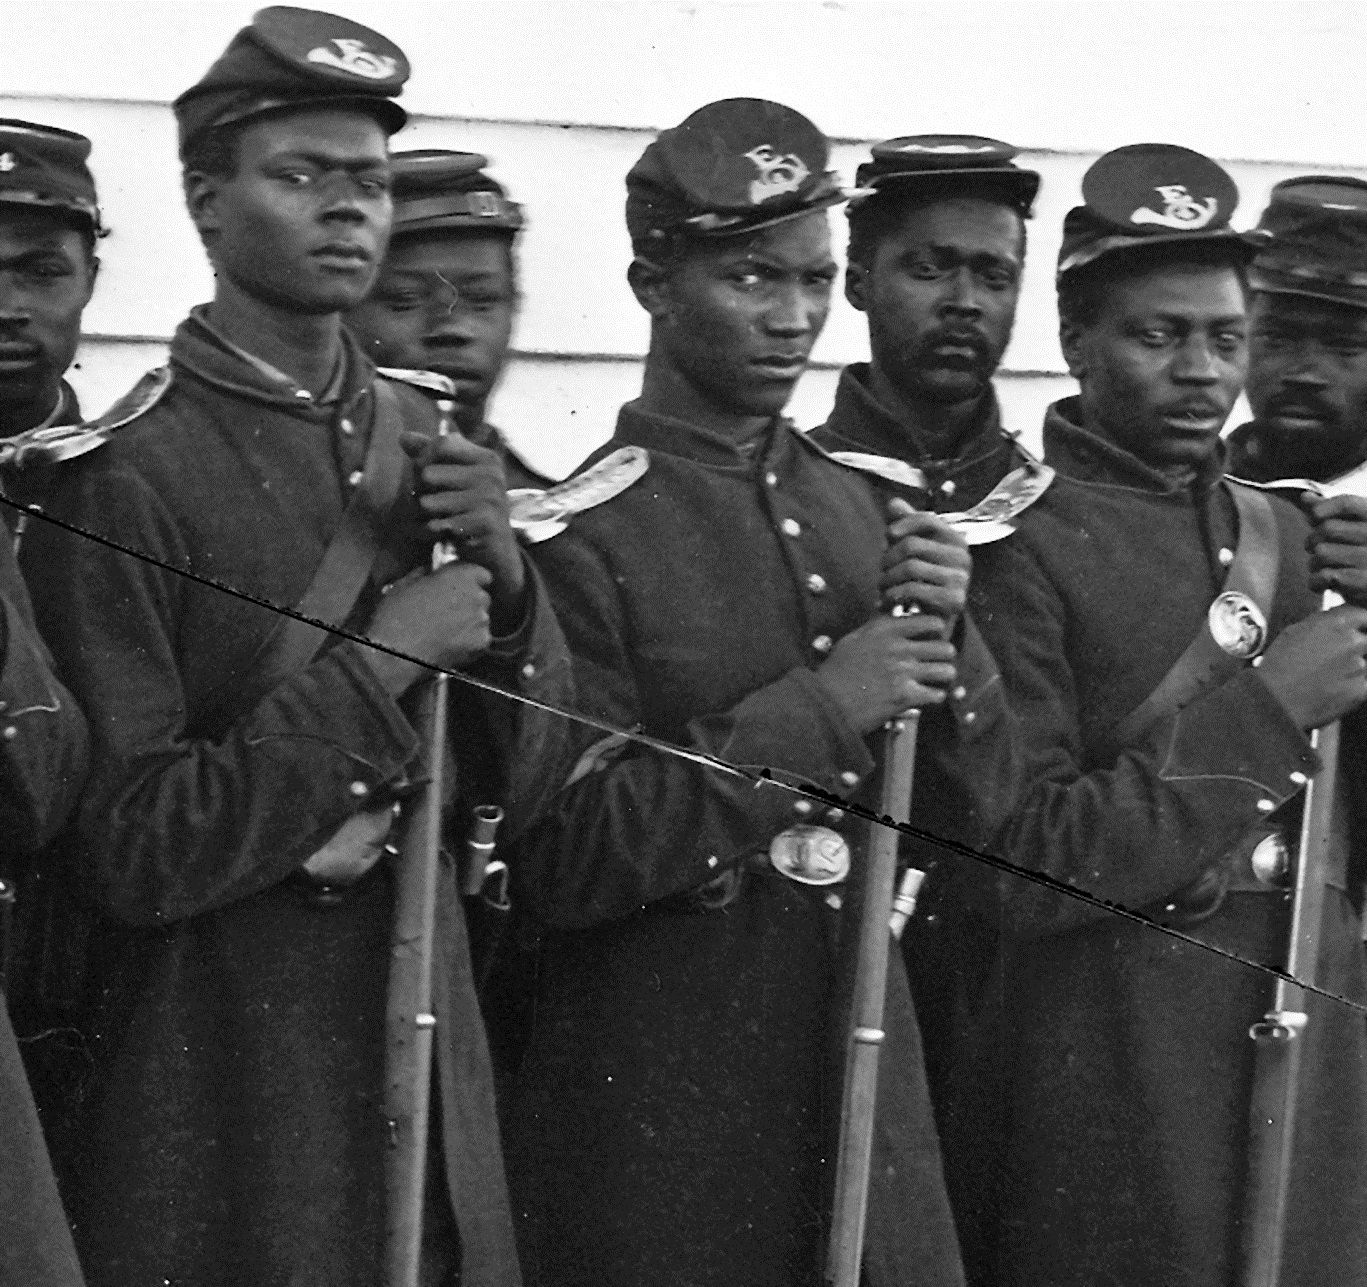 These Photos Capture the Lives of African American Soldiers Who